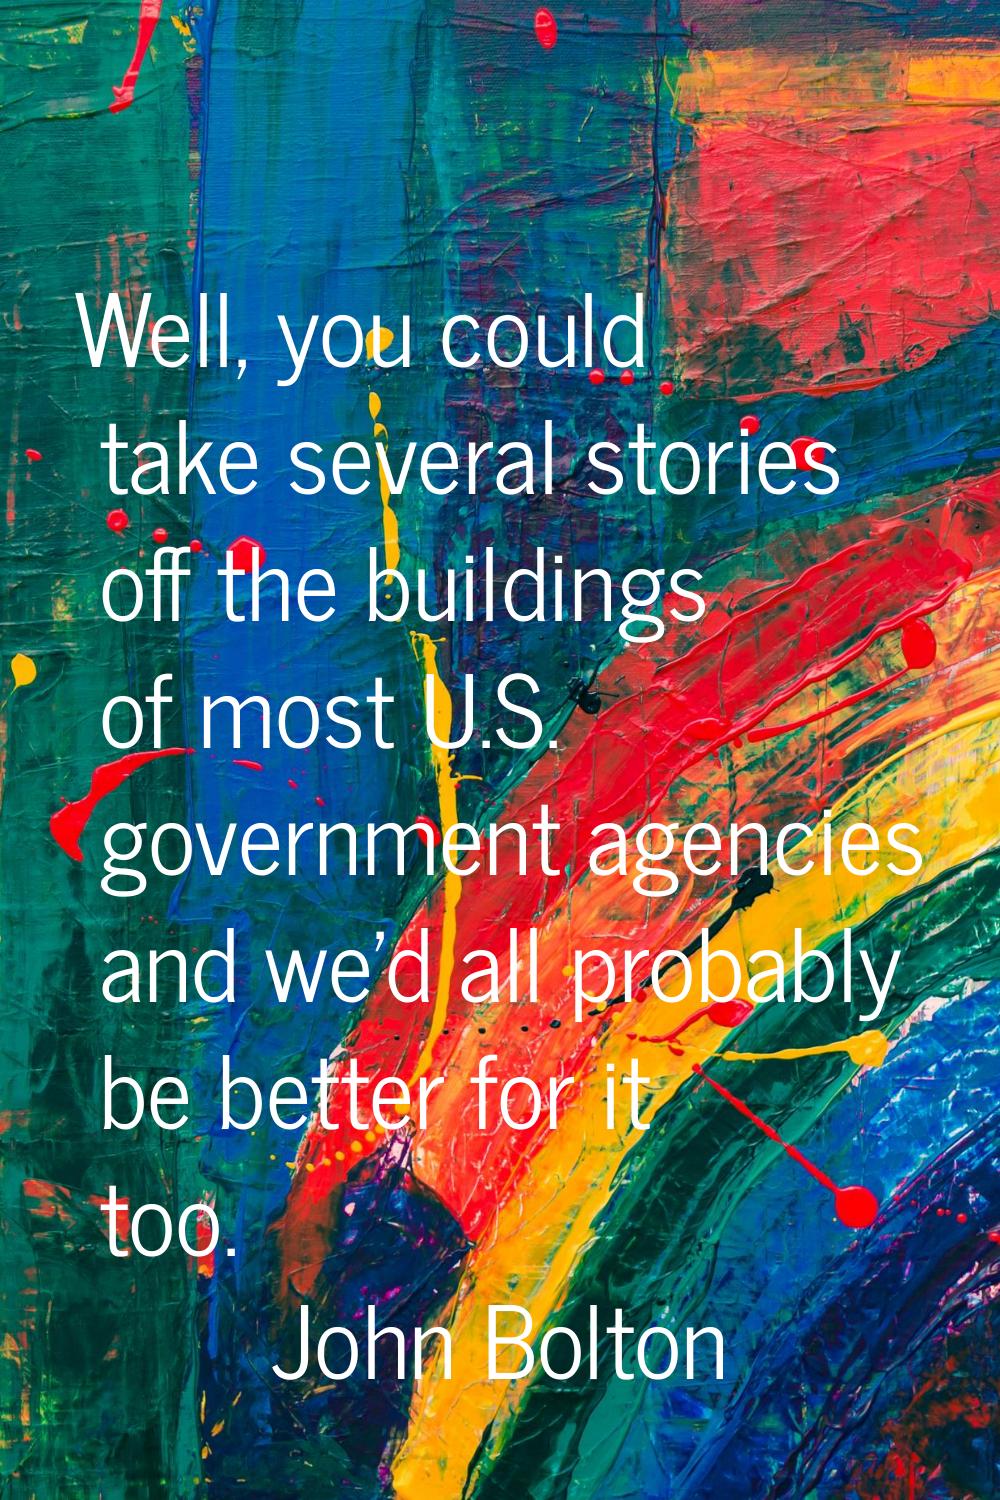 Well, you could take several stories off the buildings of most U.S. government agencies and we'd al